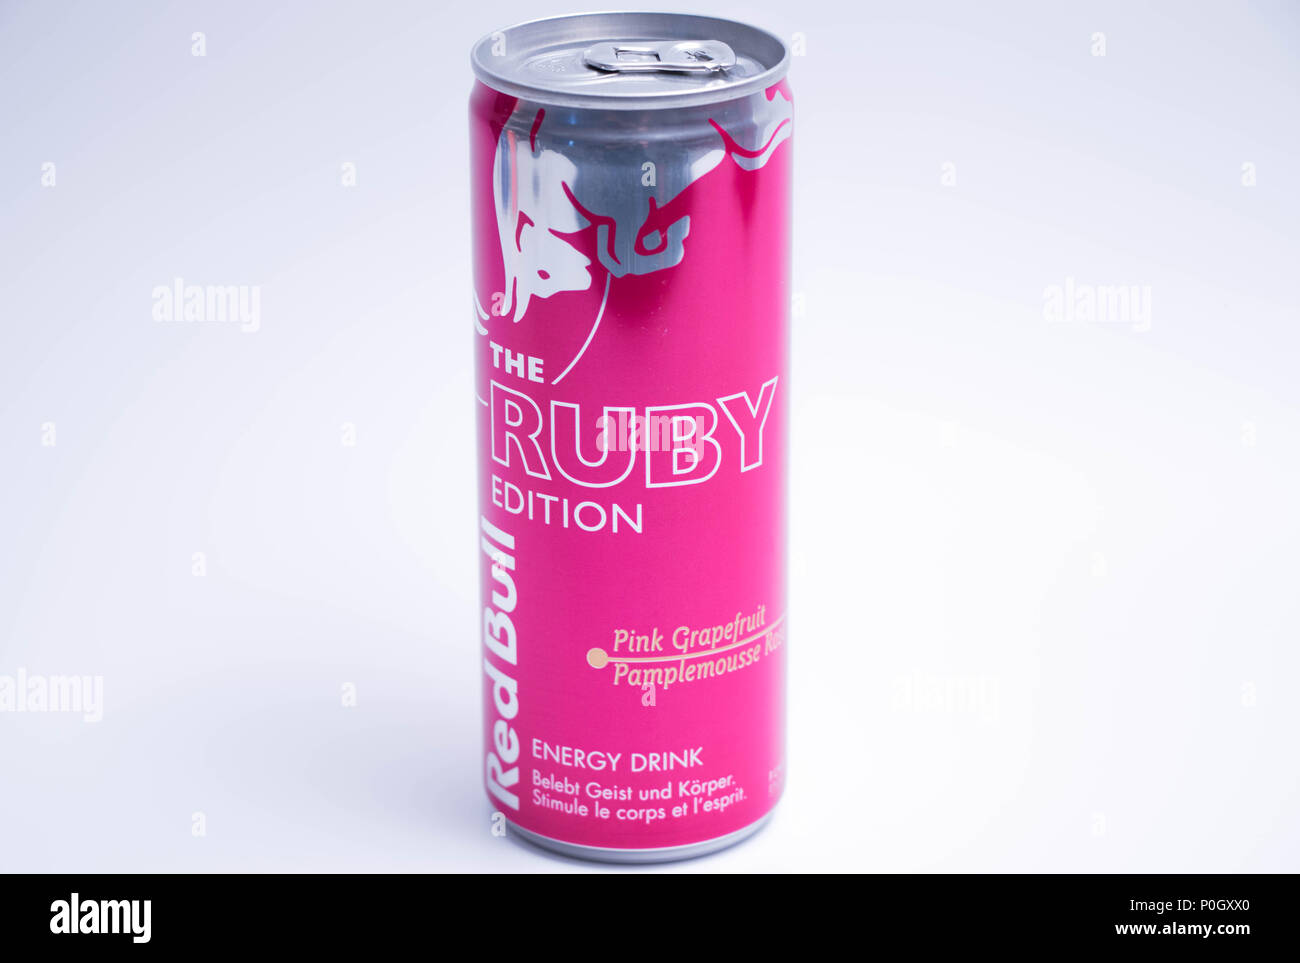 Red Bull limited edition pink Ruby Grapefruit Stockfoto